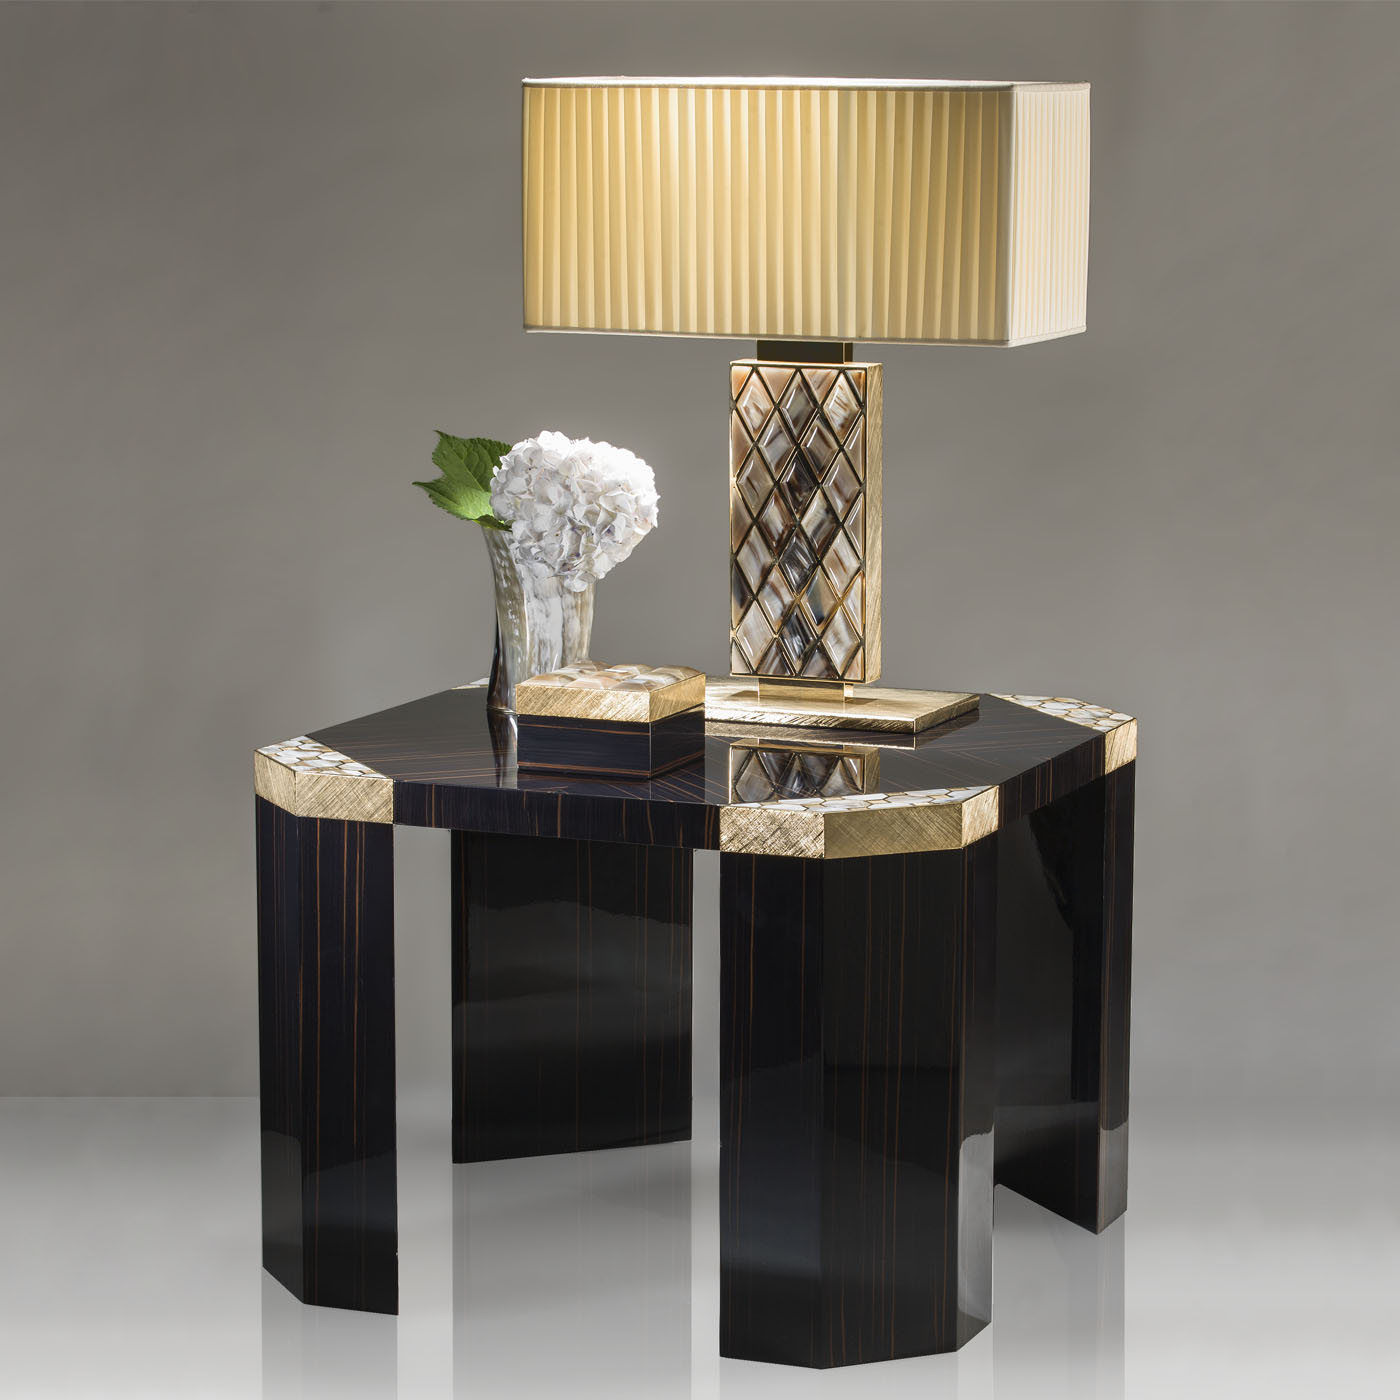 Tables and console tables - Ercolano side table in glossy ebony and horn - ambiance picture - Arcahorn